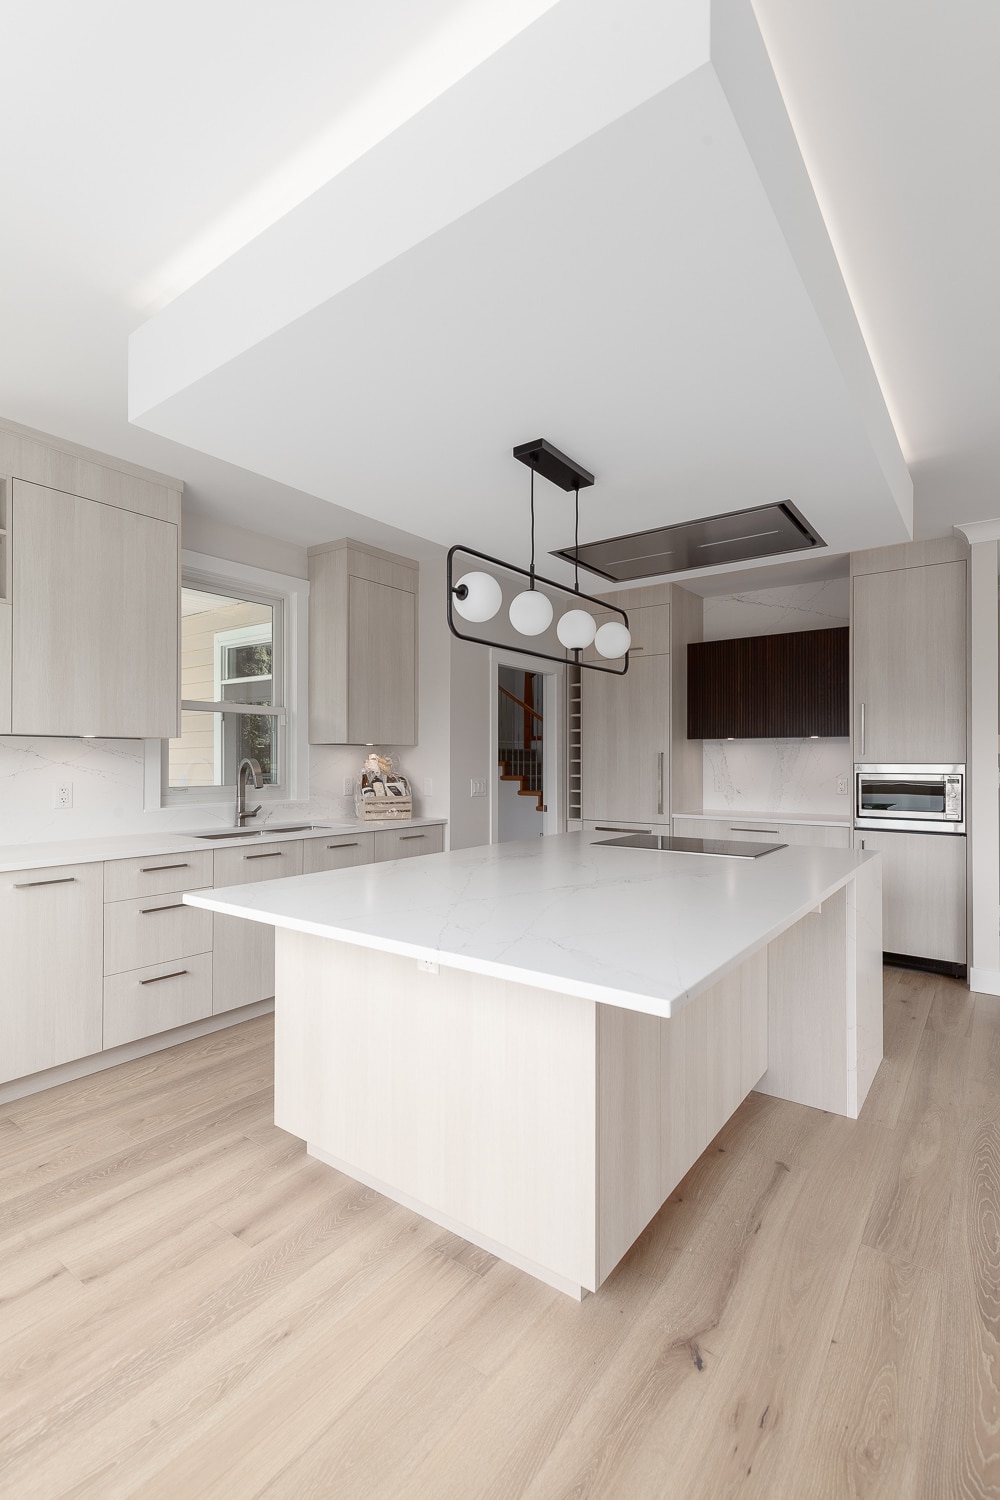 West Vancouver kitchen Remodeling done by Canadian Home Style